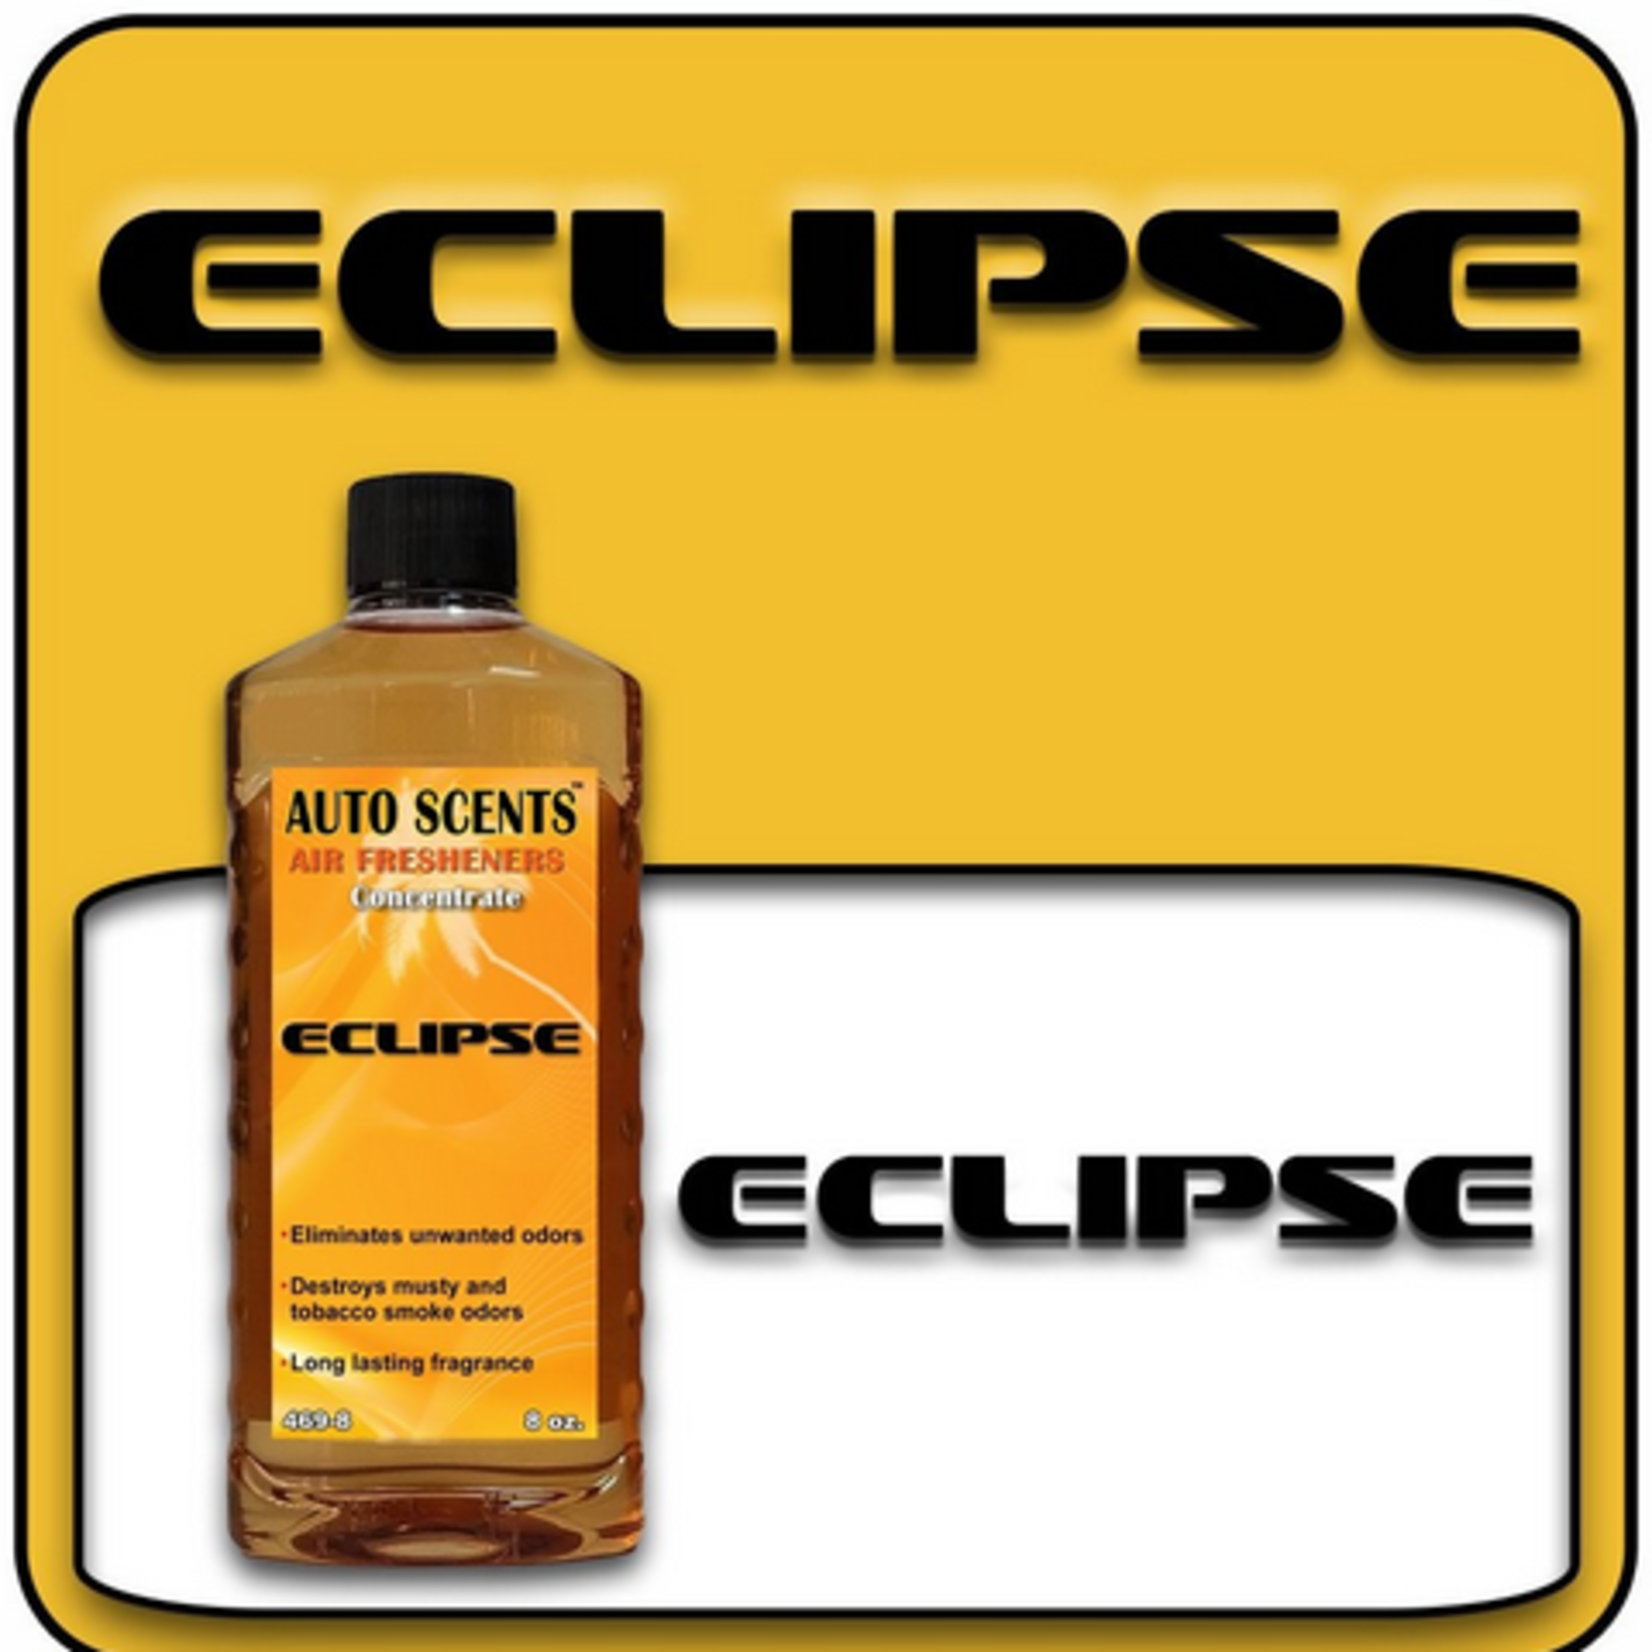 Auto Scents Auto Scents Air Fresheners - Eclipse  2X Concentrate